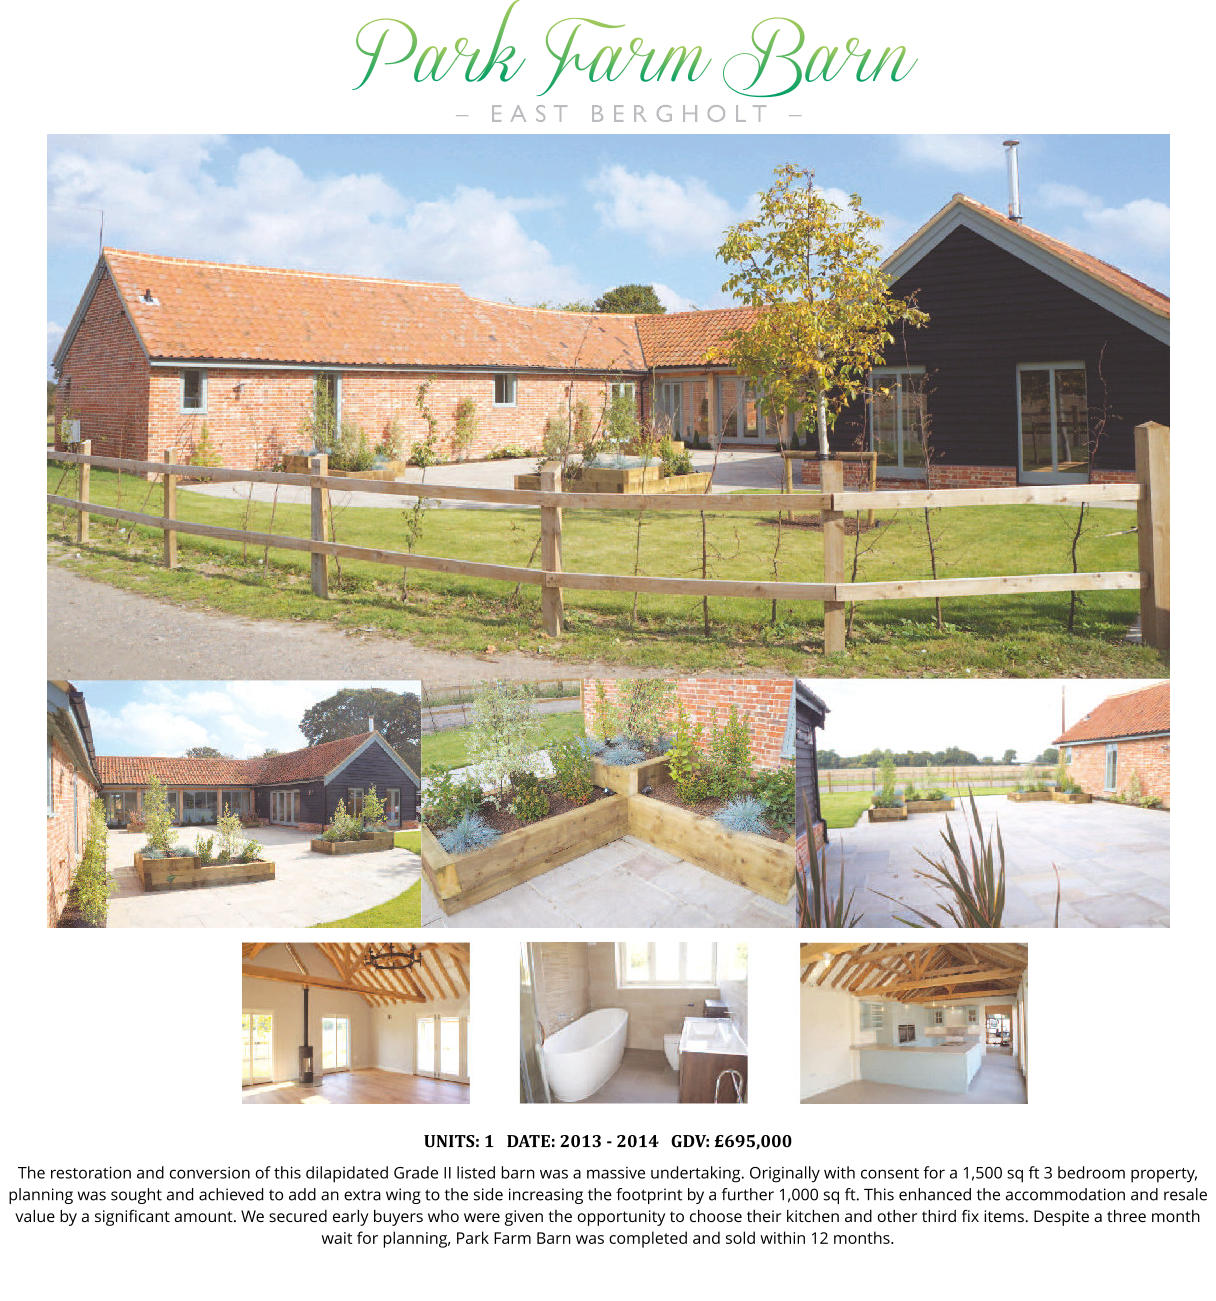 UNITS: 1   DATE: 2013 - 2014   GDV: £695,000 The restoration and conversion of this dilapidated Grade II listed barn was a massive undertaking. Originally with consent for a 1,500 sq ft 3 bedroom property, planning was sought and achieved to add an extra wing to the side increasing the footprint by a further 1,000 sq ft. This enhanced the accommodation and resale value by a significant amount. We secured early buyers who were given the opportunity to choose their kitchen and other third fix items. Despite a three month wait for planning, Park Farm Barn was completed and sold within 12 months.